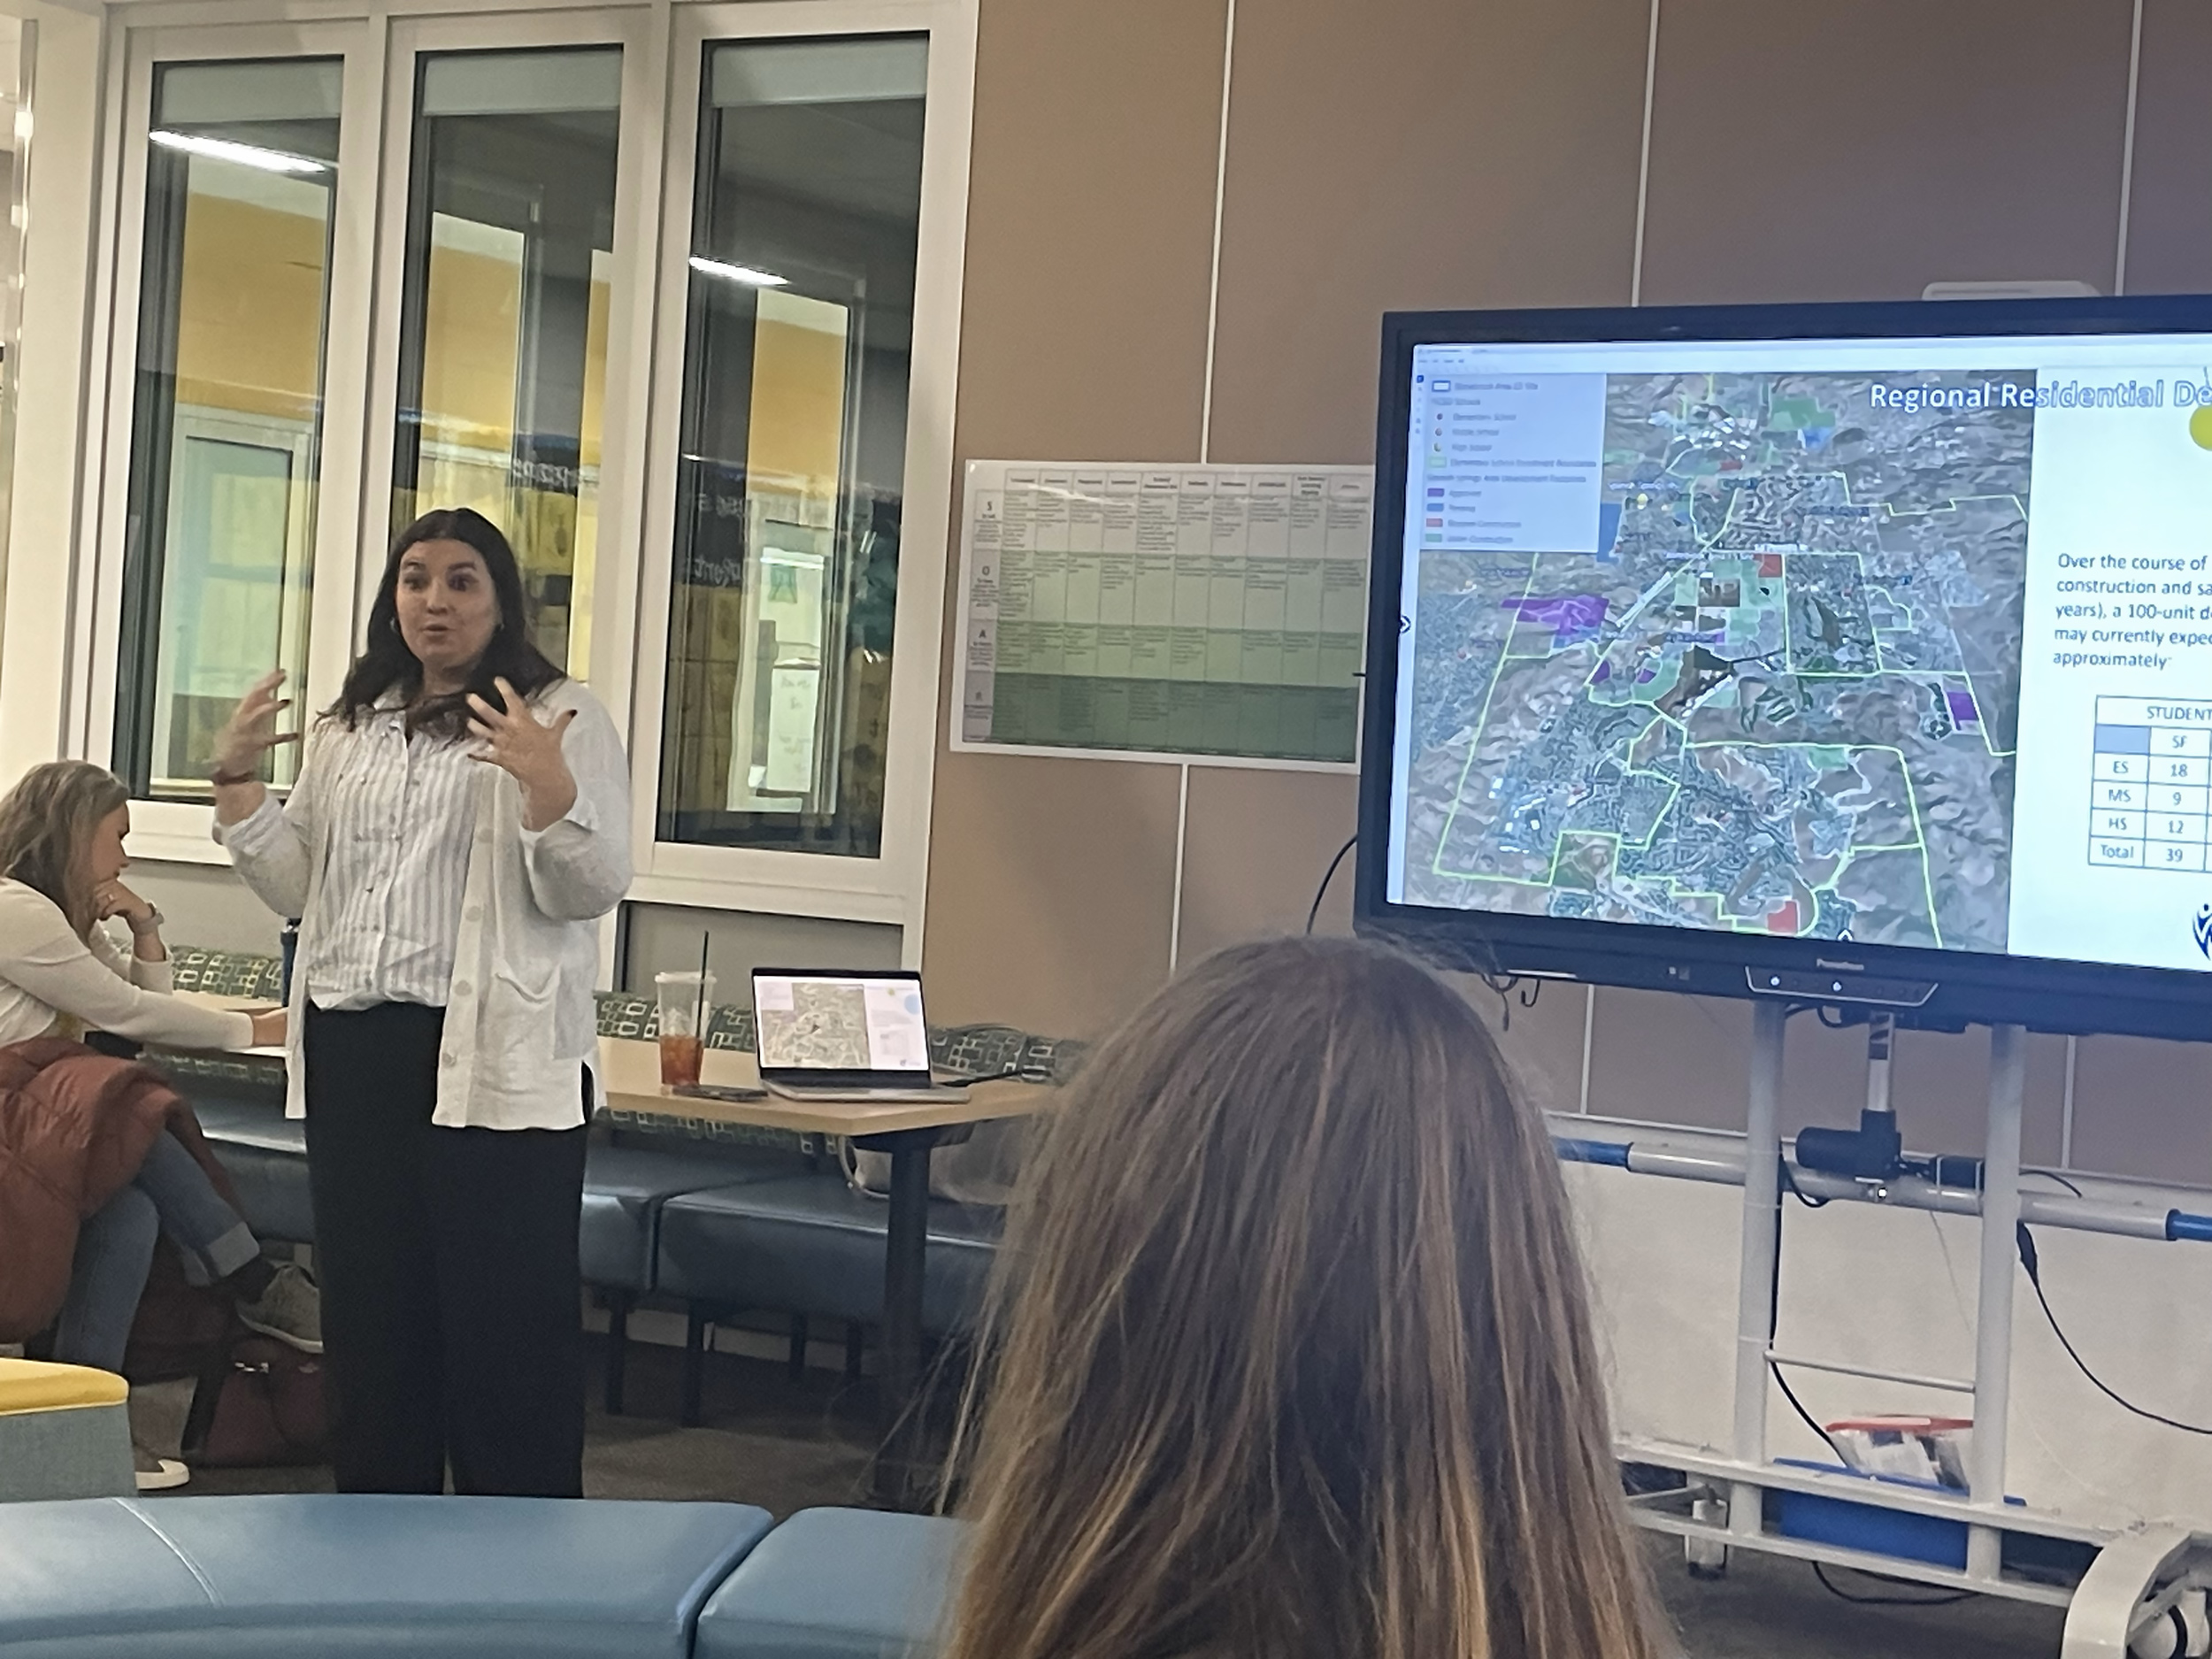 Christine Hull delivering a presentation and answering questions at a Washoe County School Board Zoning Advisory Committee meeting in the community